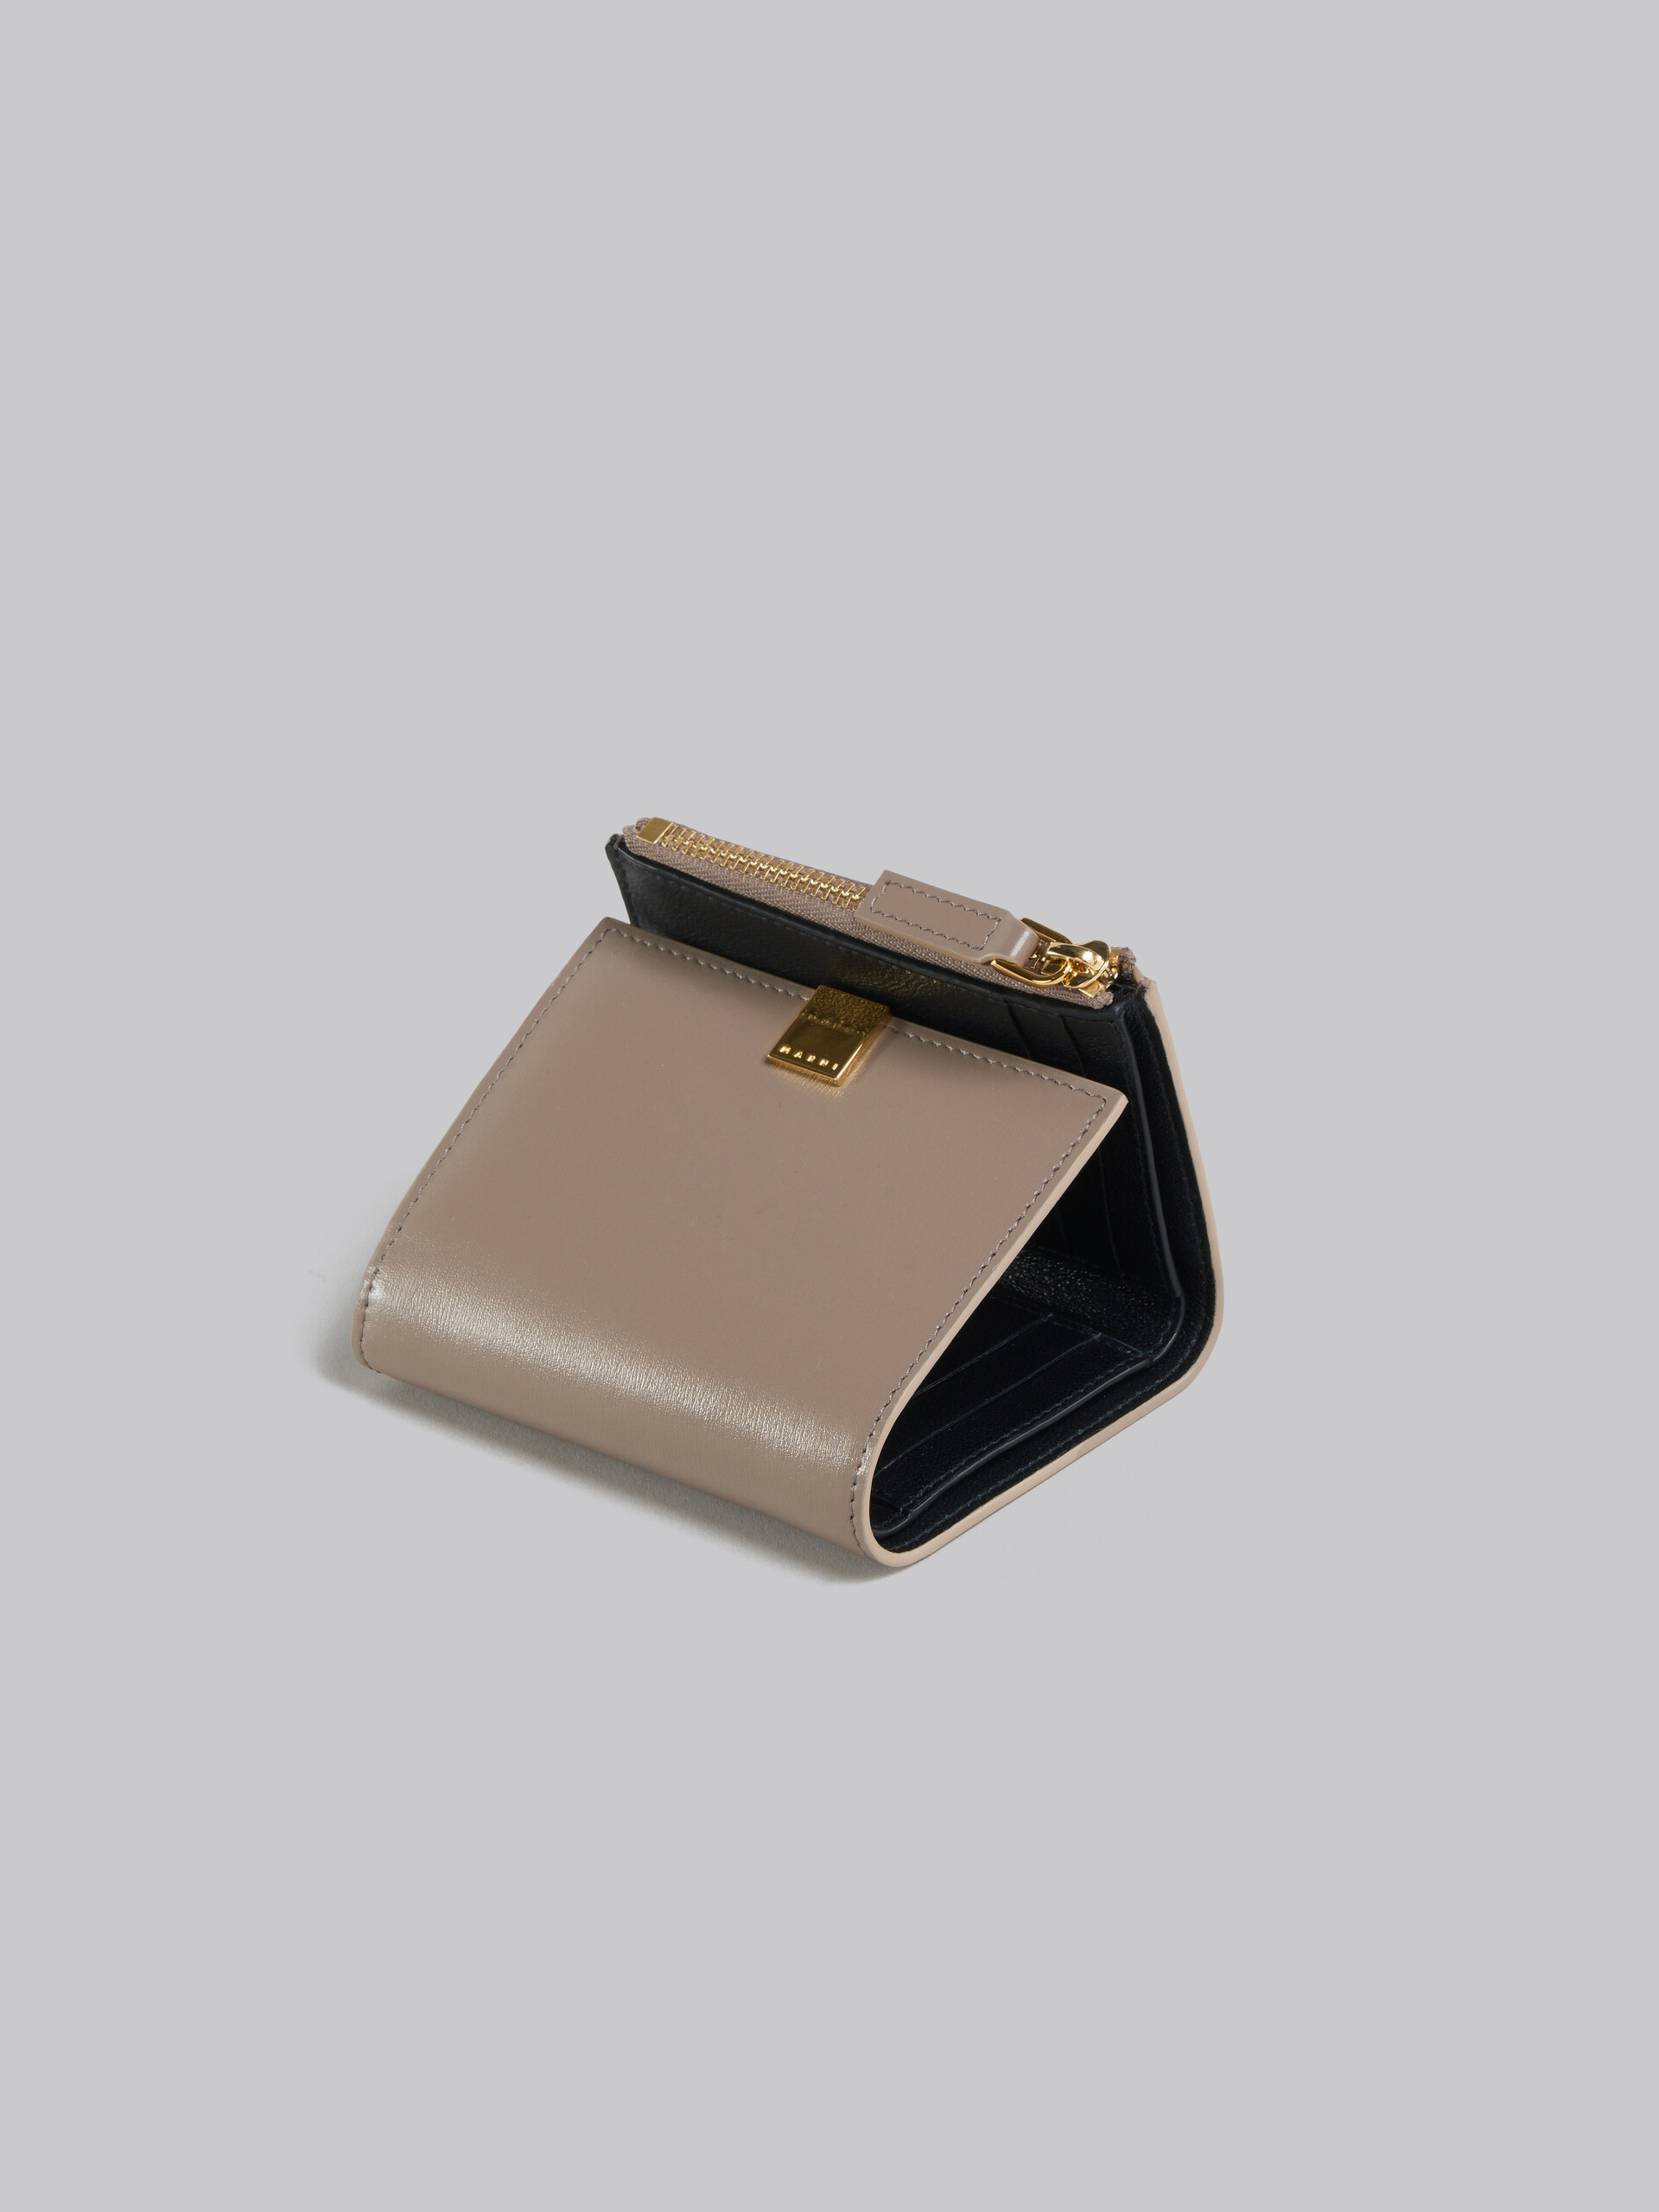 TRIFOLD - Wallets - Image 4